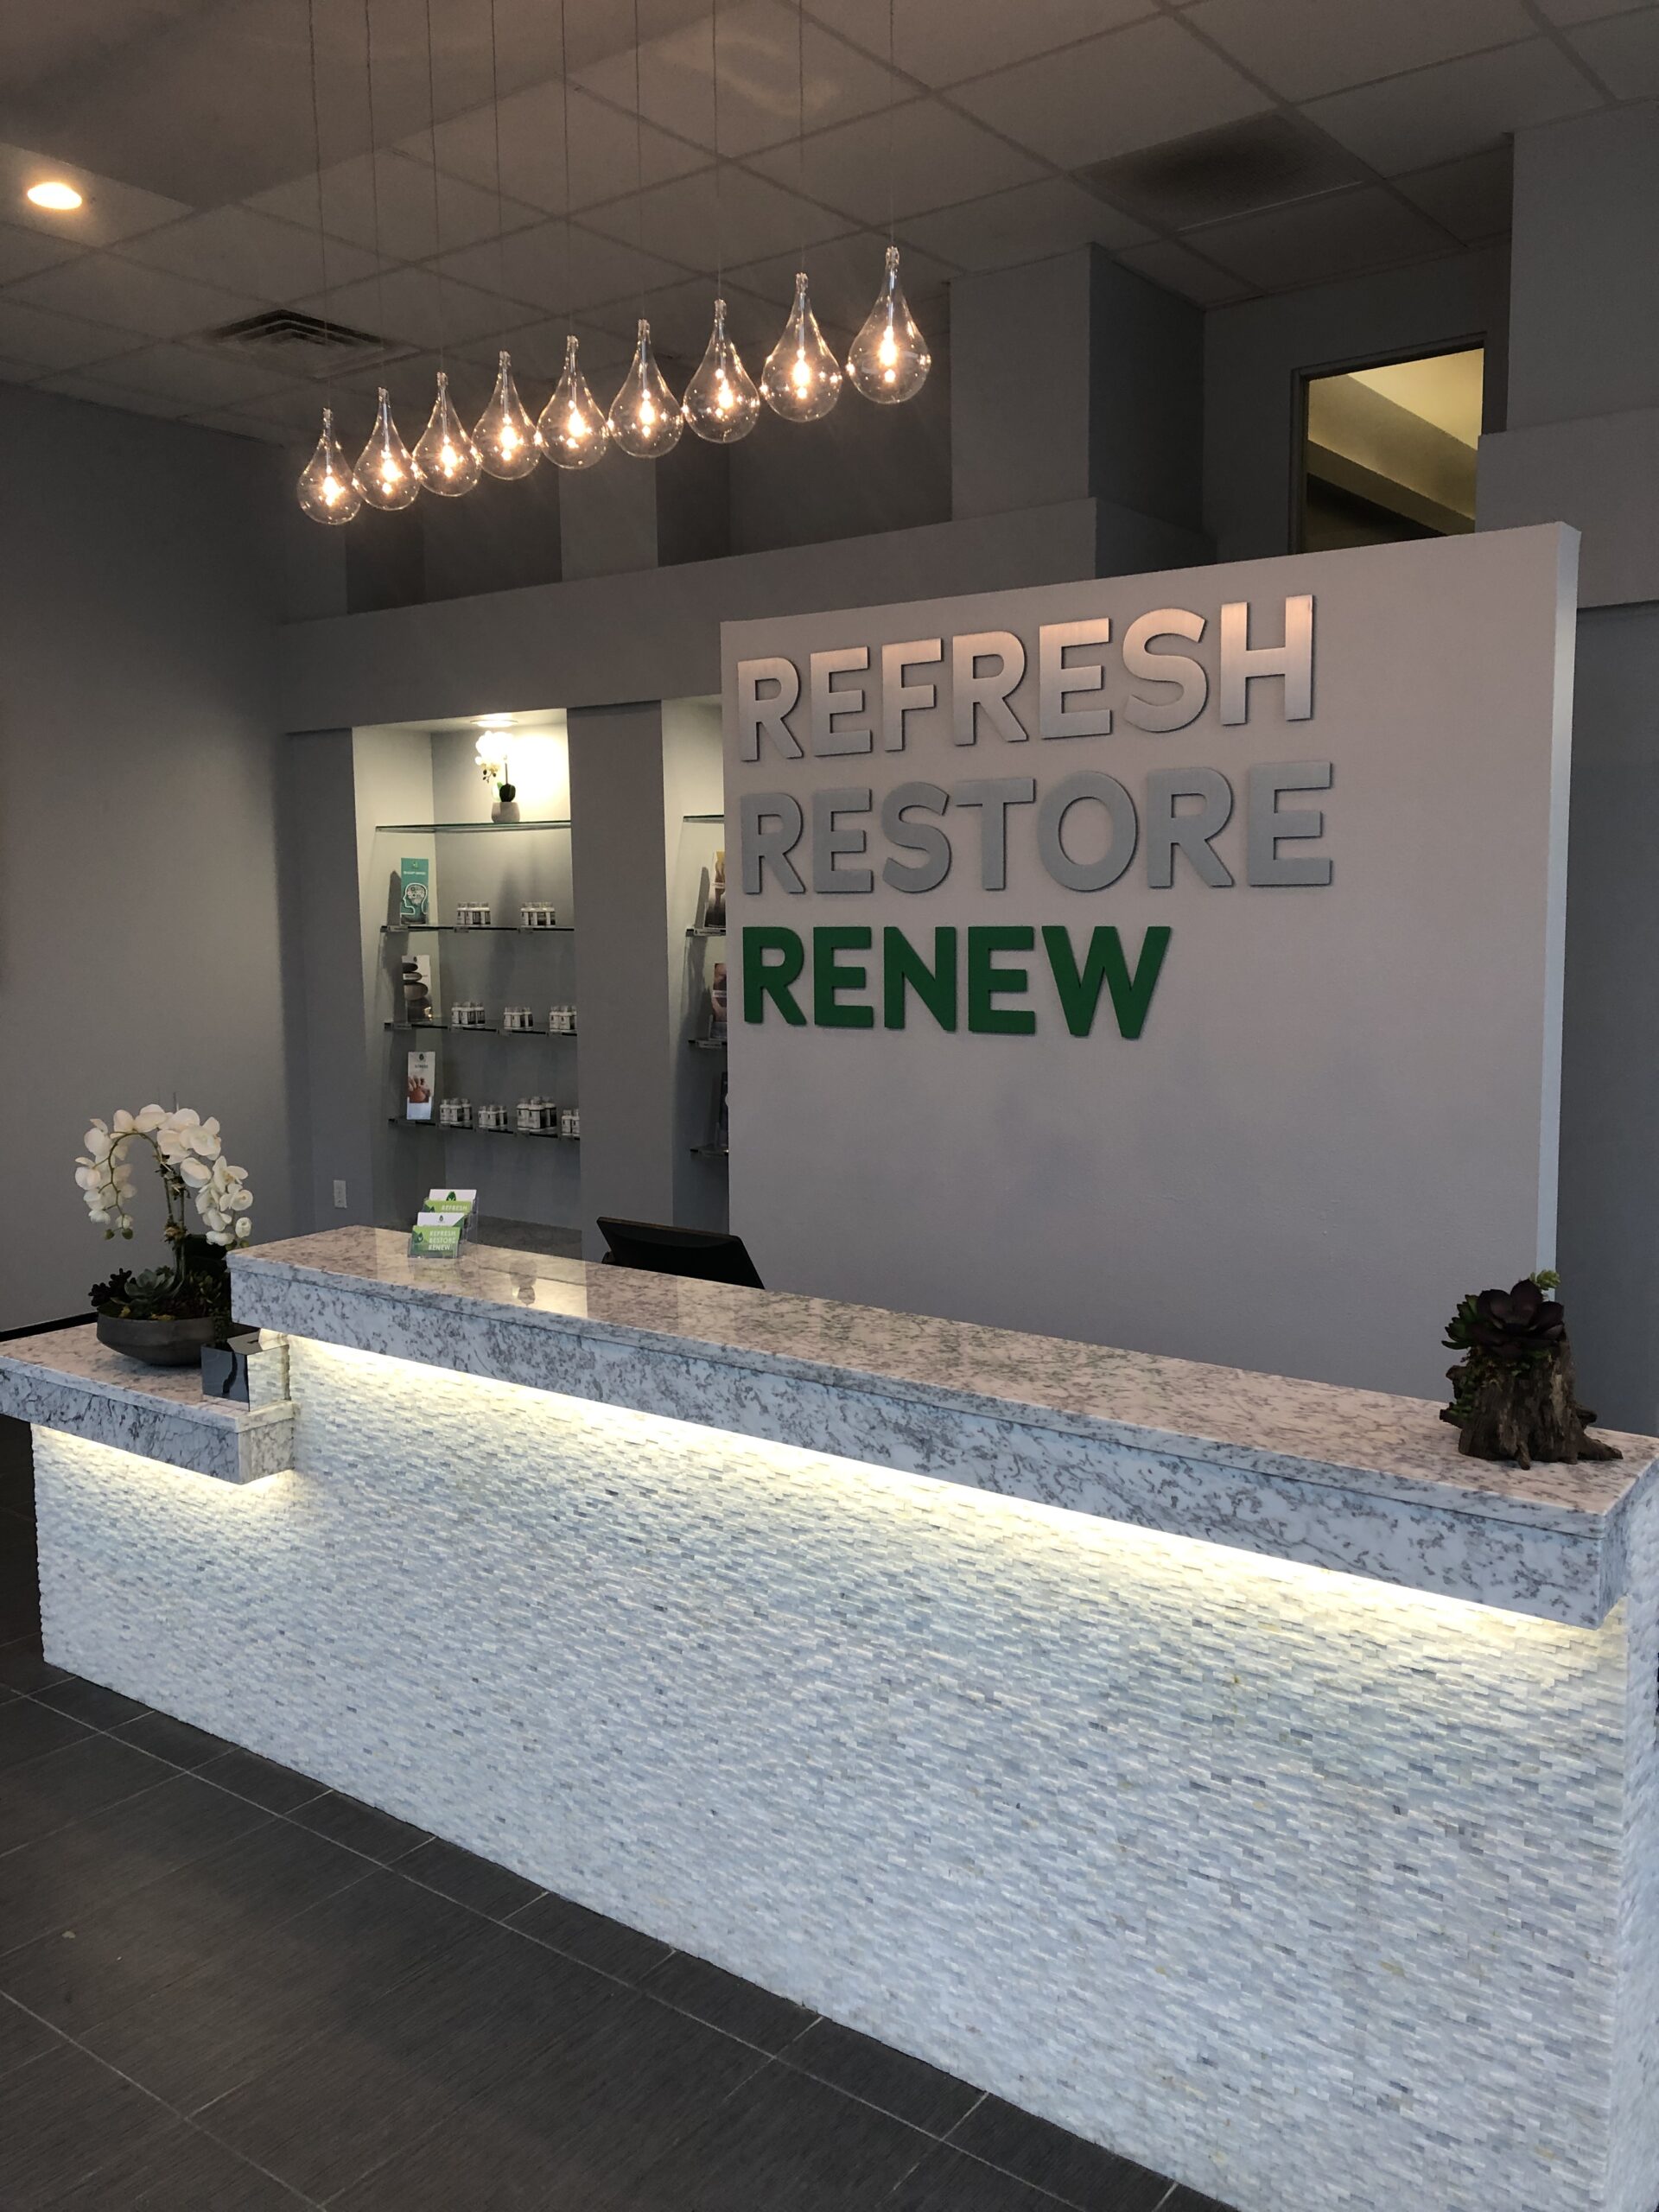 A reception area with a sign that says refresh restore renew, offering nutritional IV therapy and drip hydration.